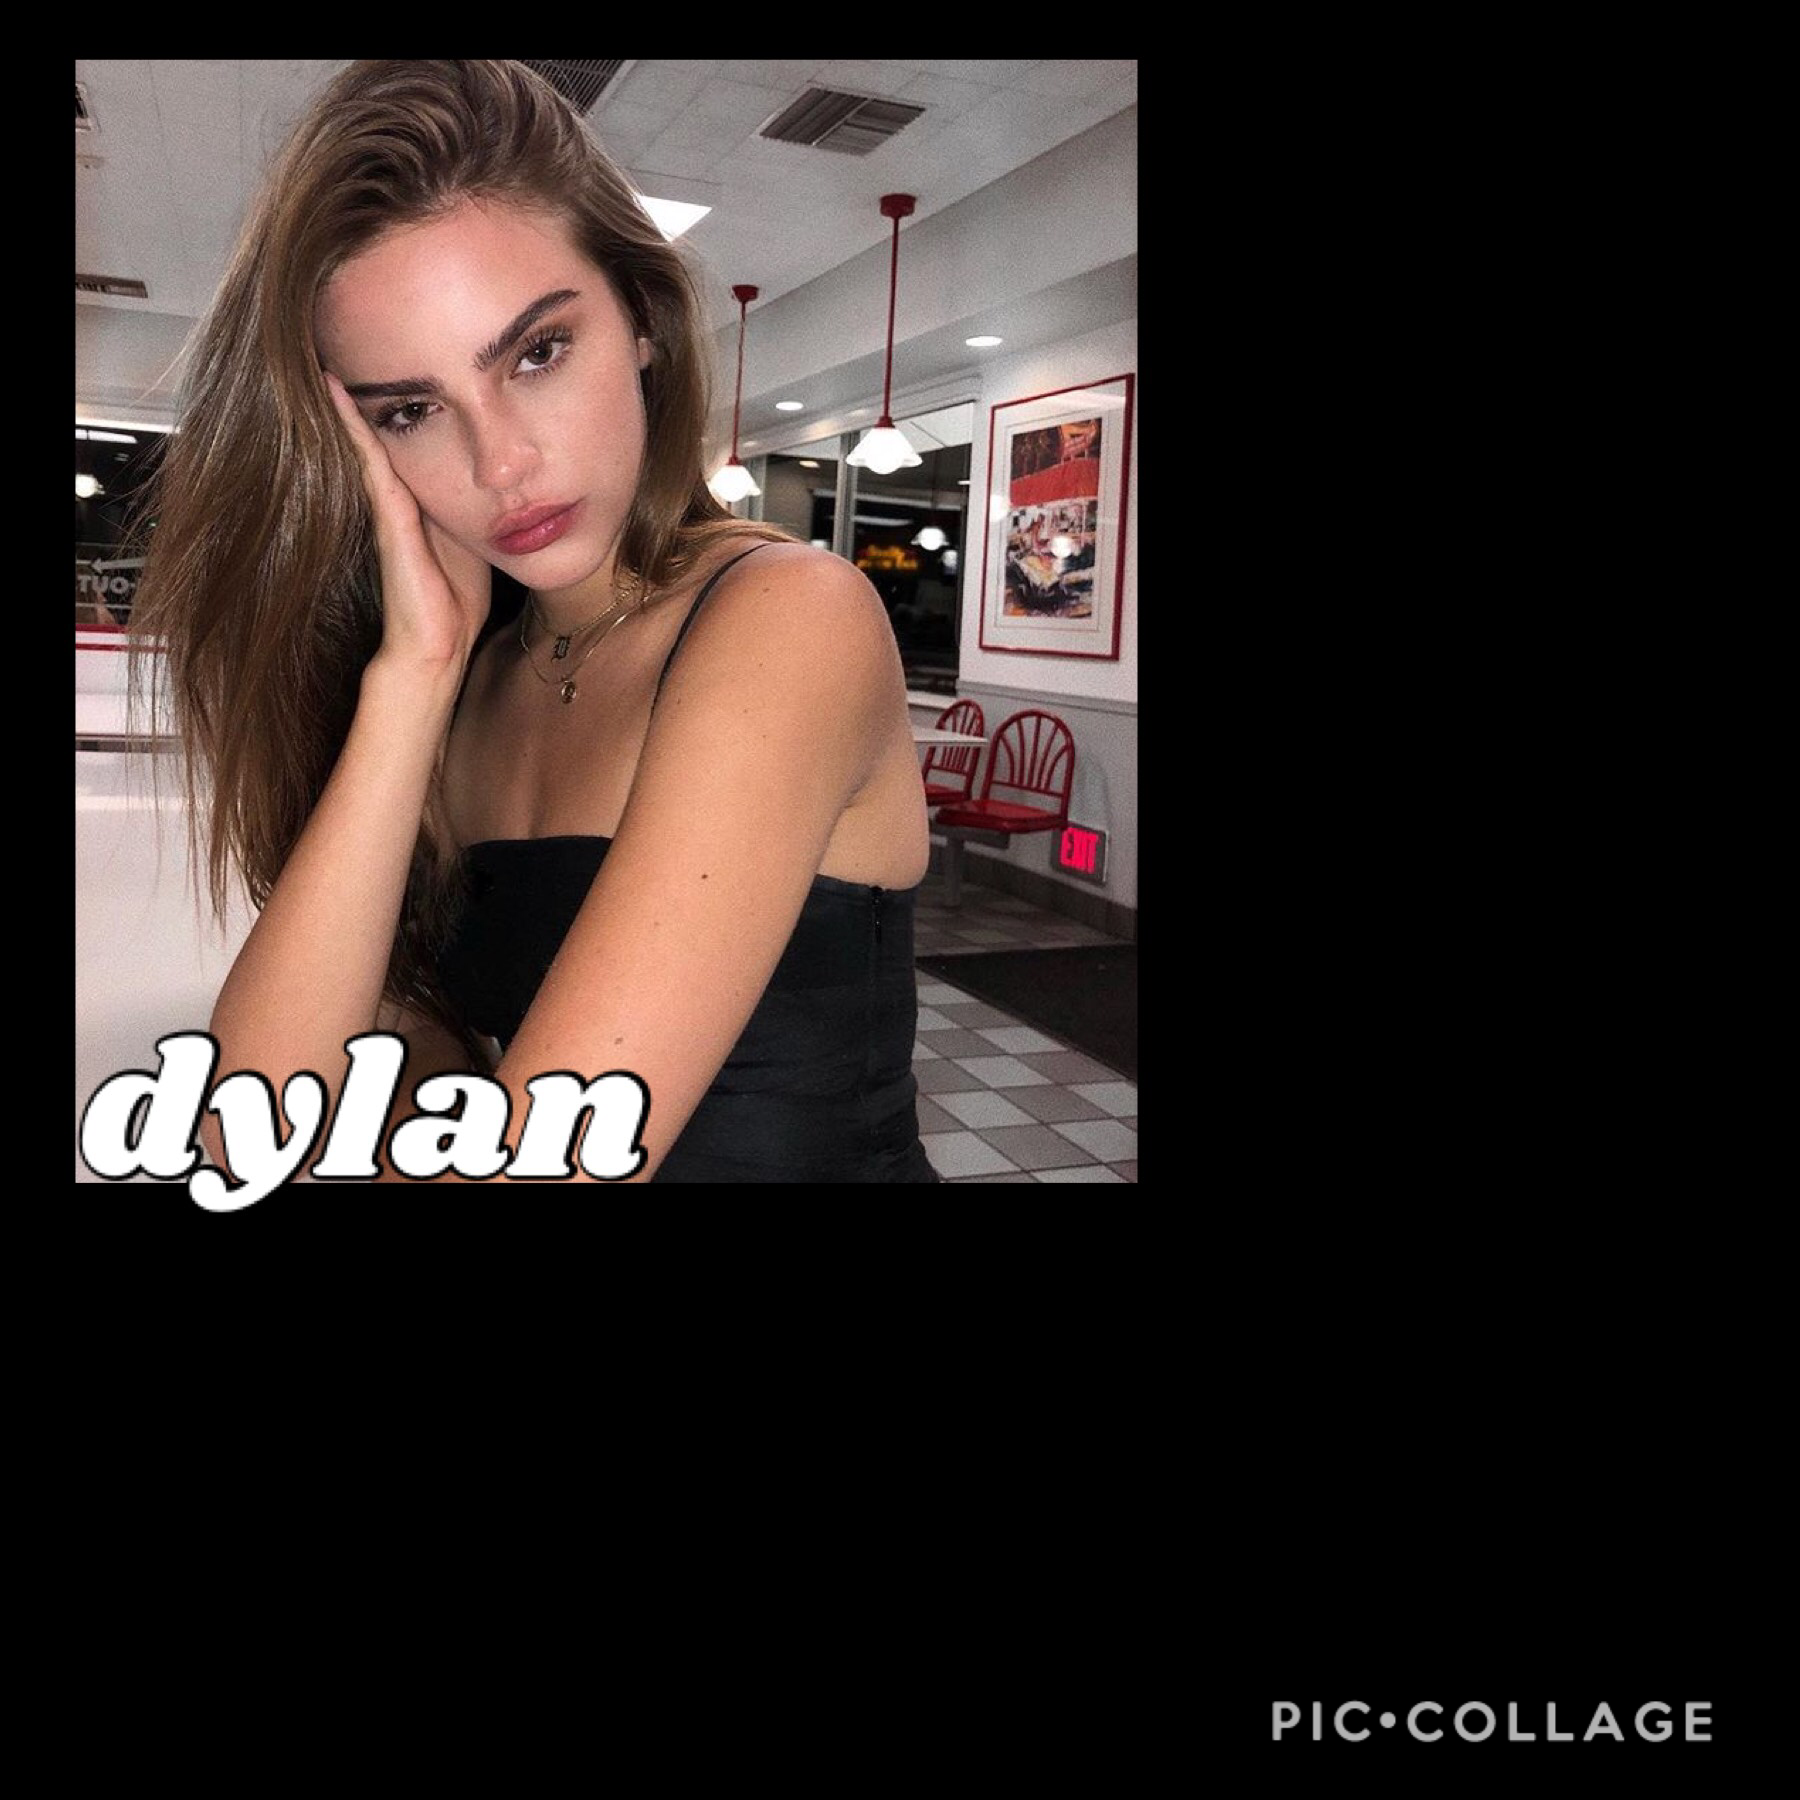 tap for bio

dylan
single :)
friends would be nice
